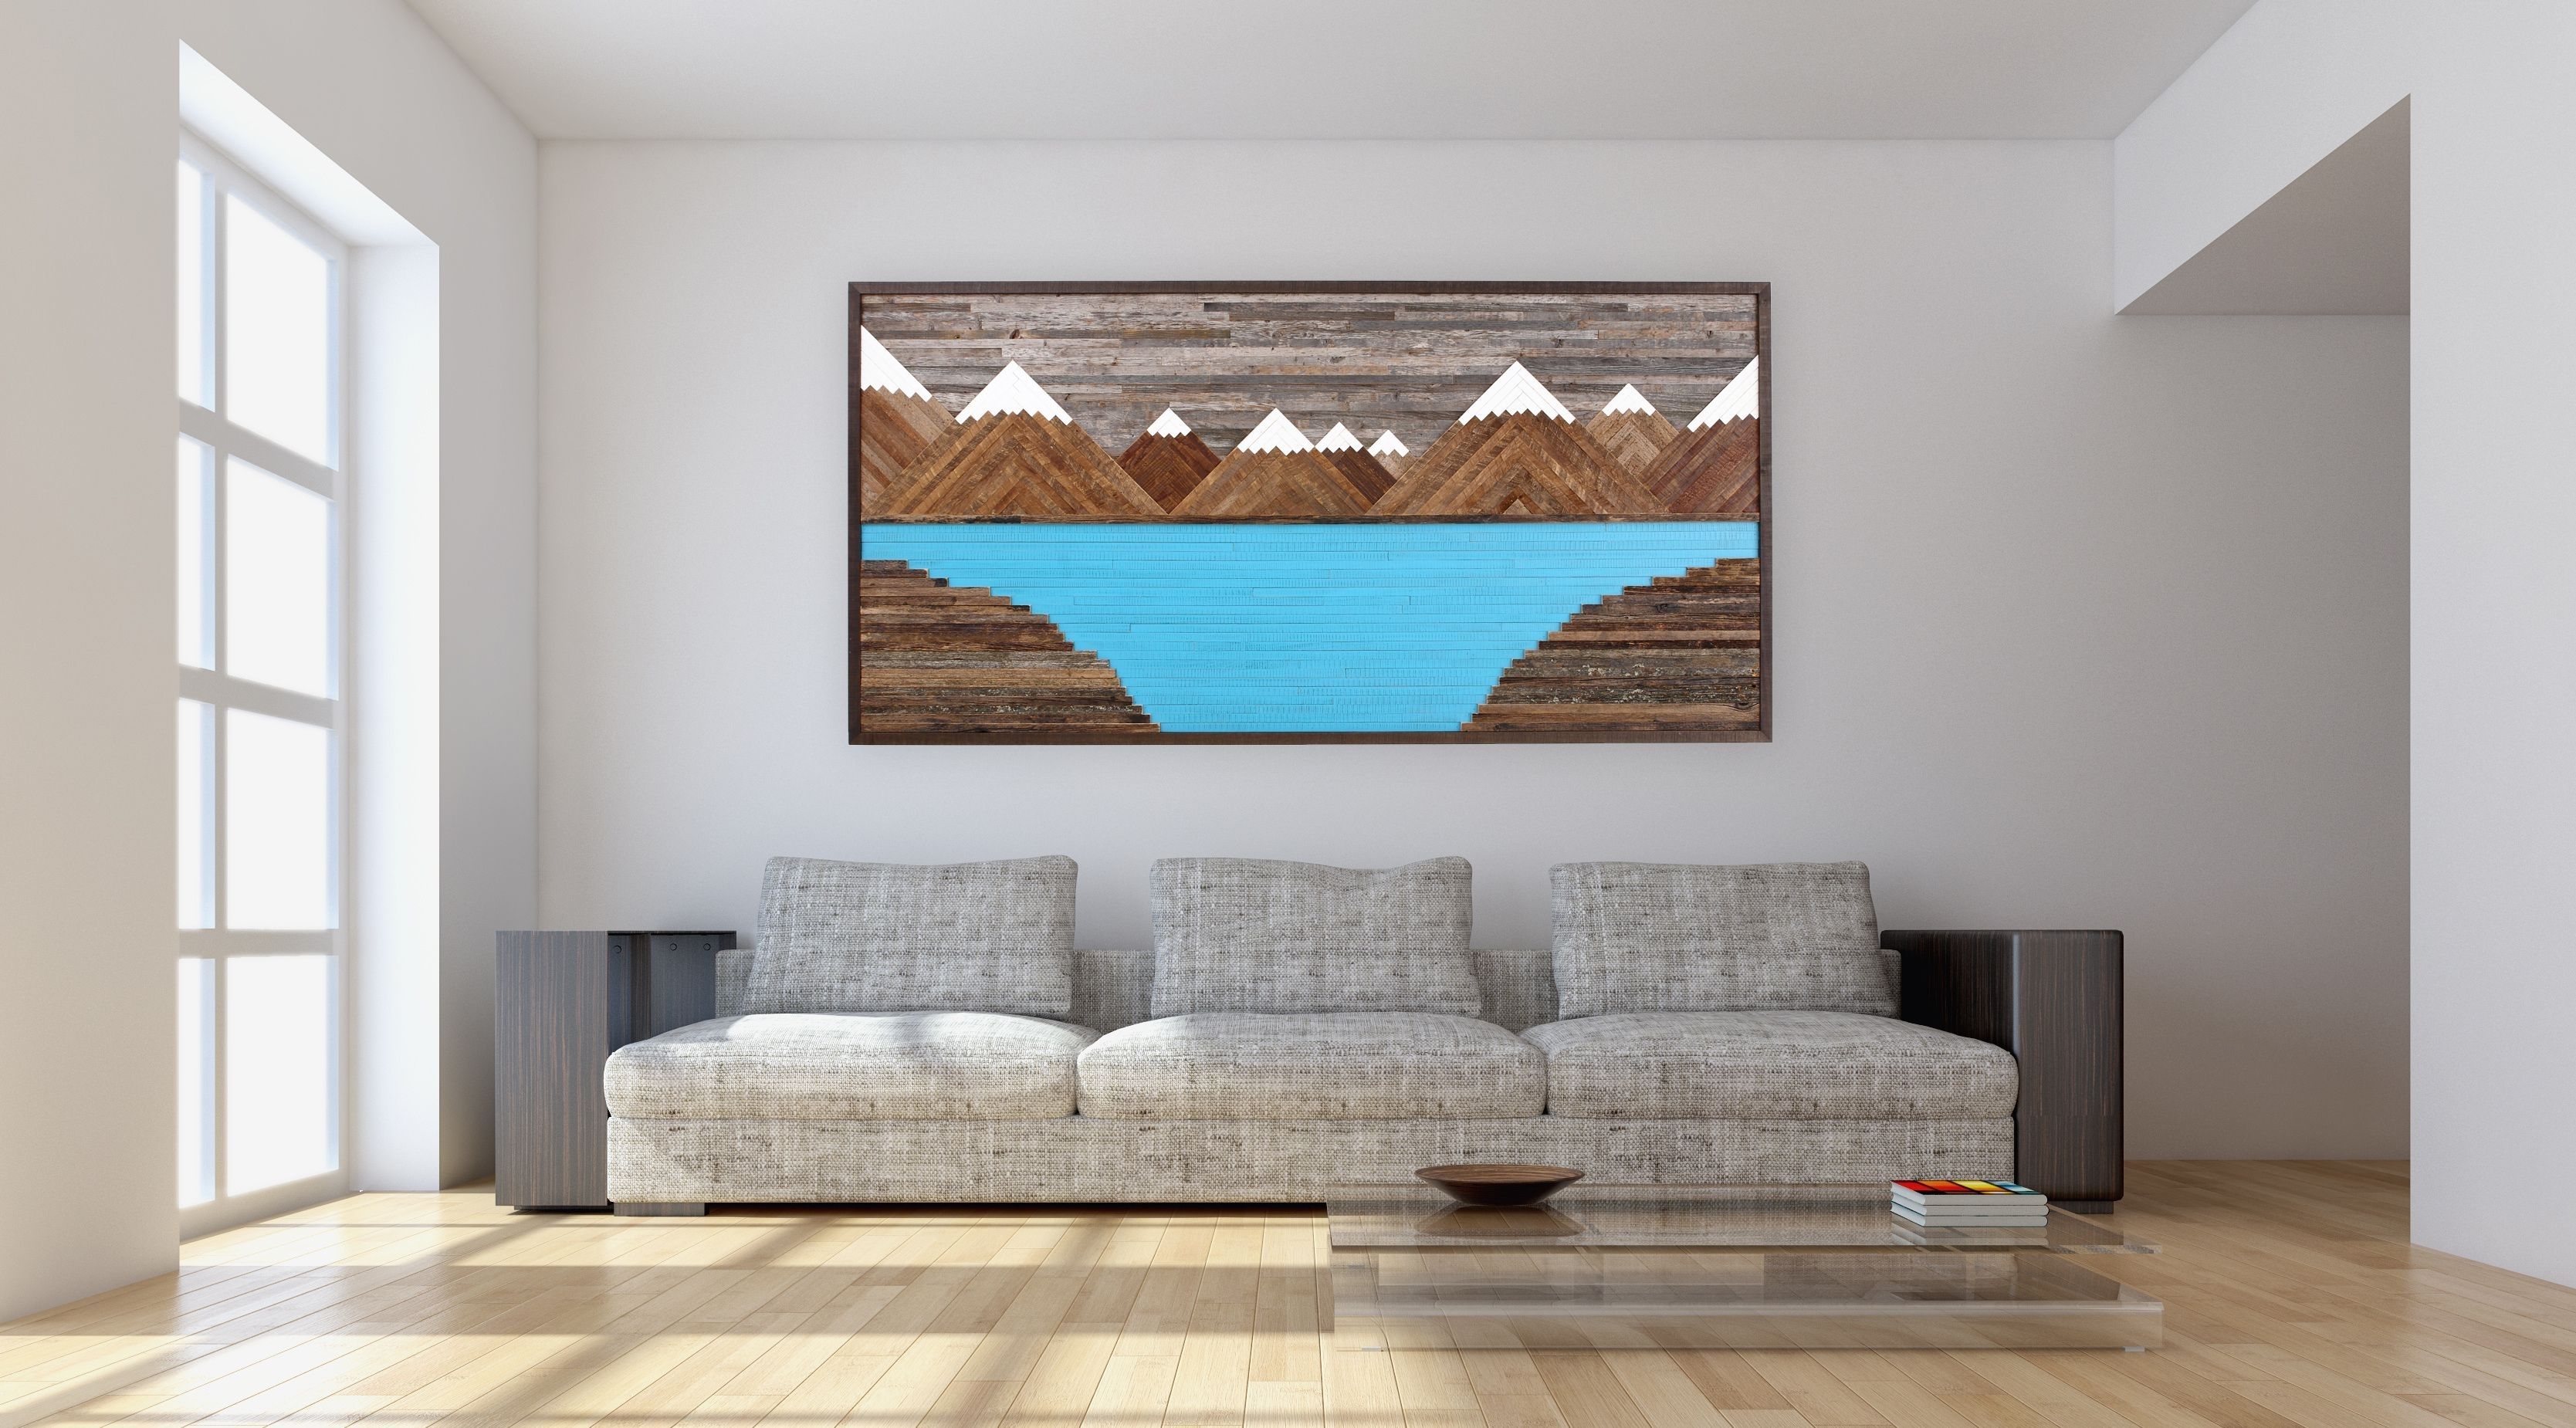 Handmade Glacier Mountain Landscape, Wood Wall Art, Reclaimed Wood With Rustic Wall Art (View 15 of 20)